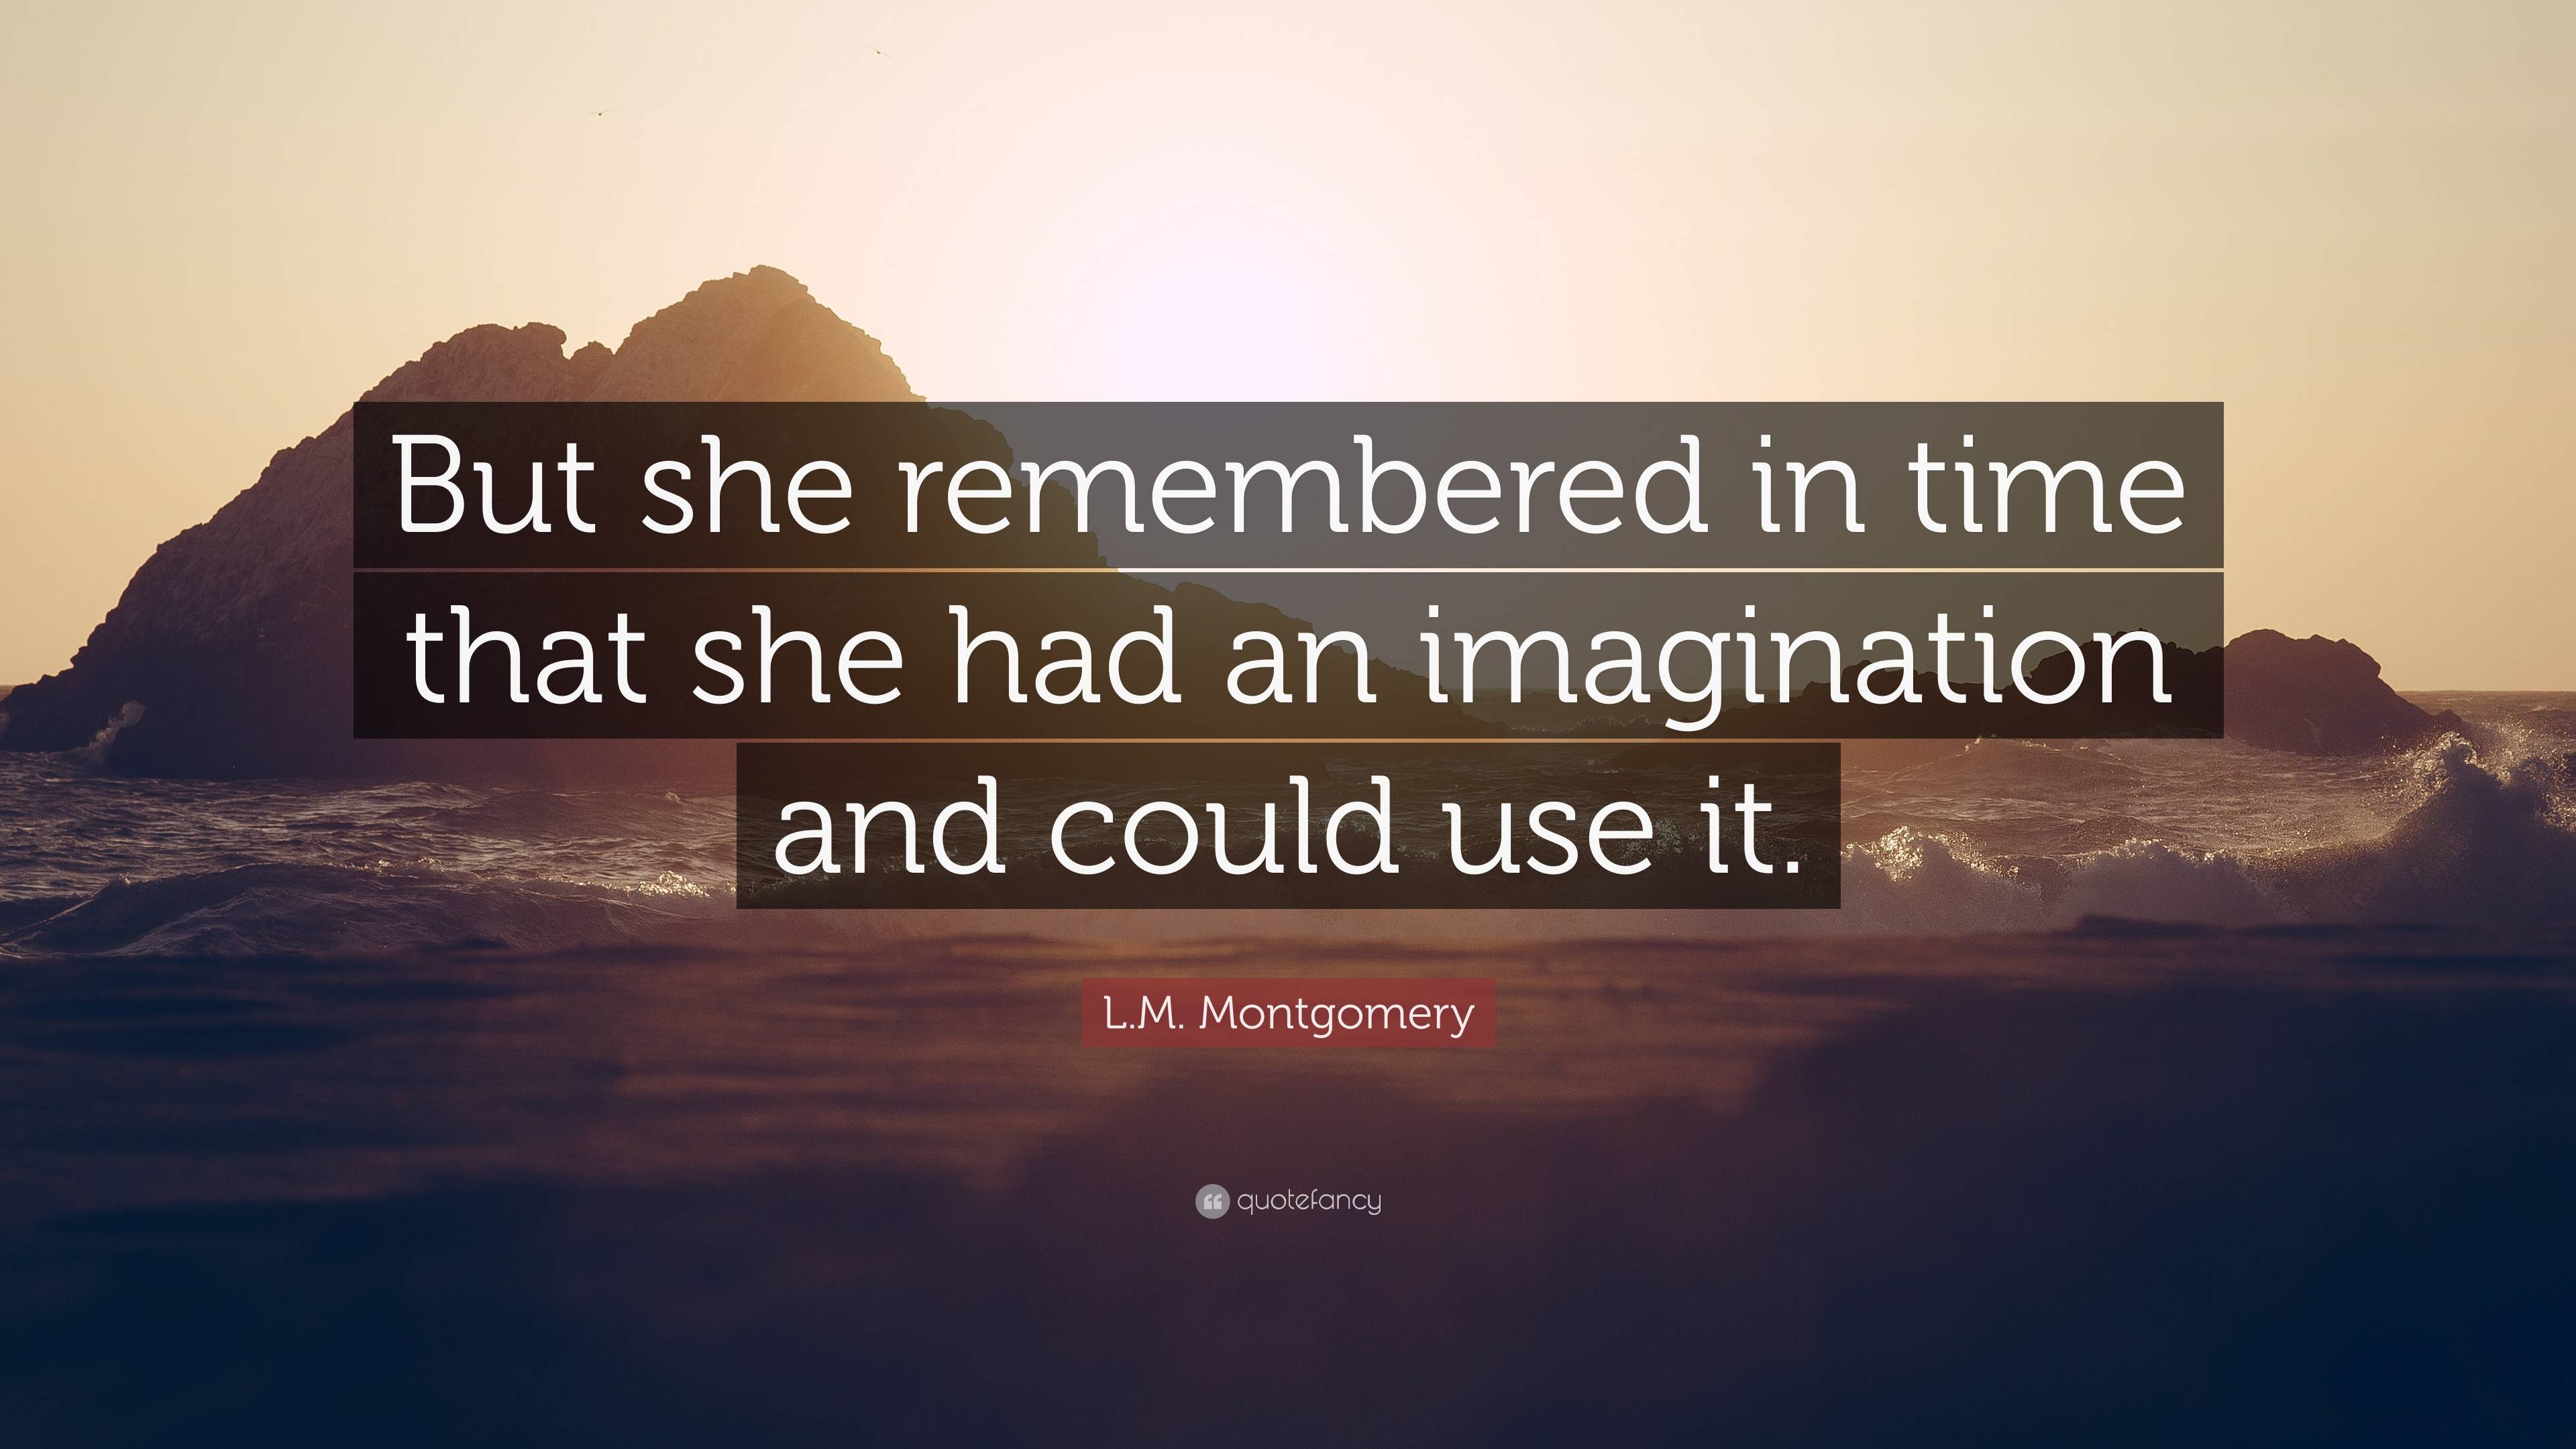 L.M. Montgomery Quote: “But she remembered in time that she had an ...